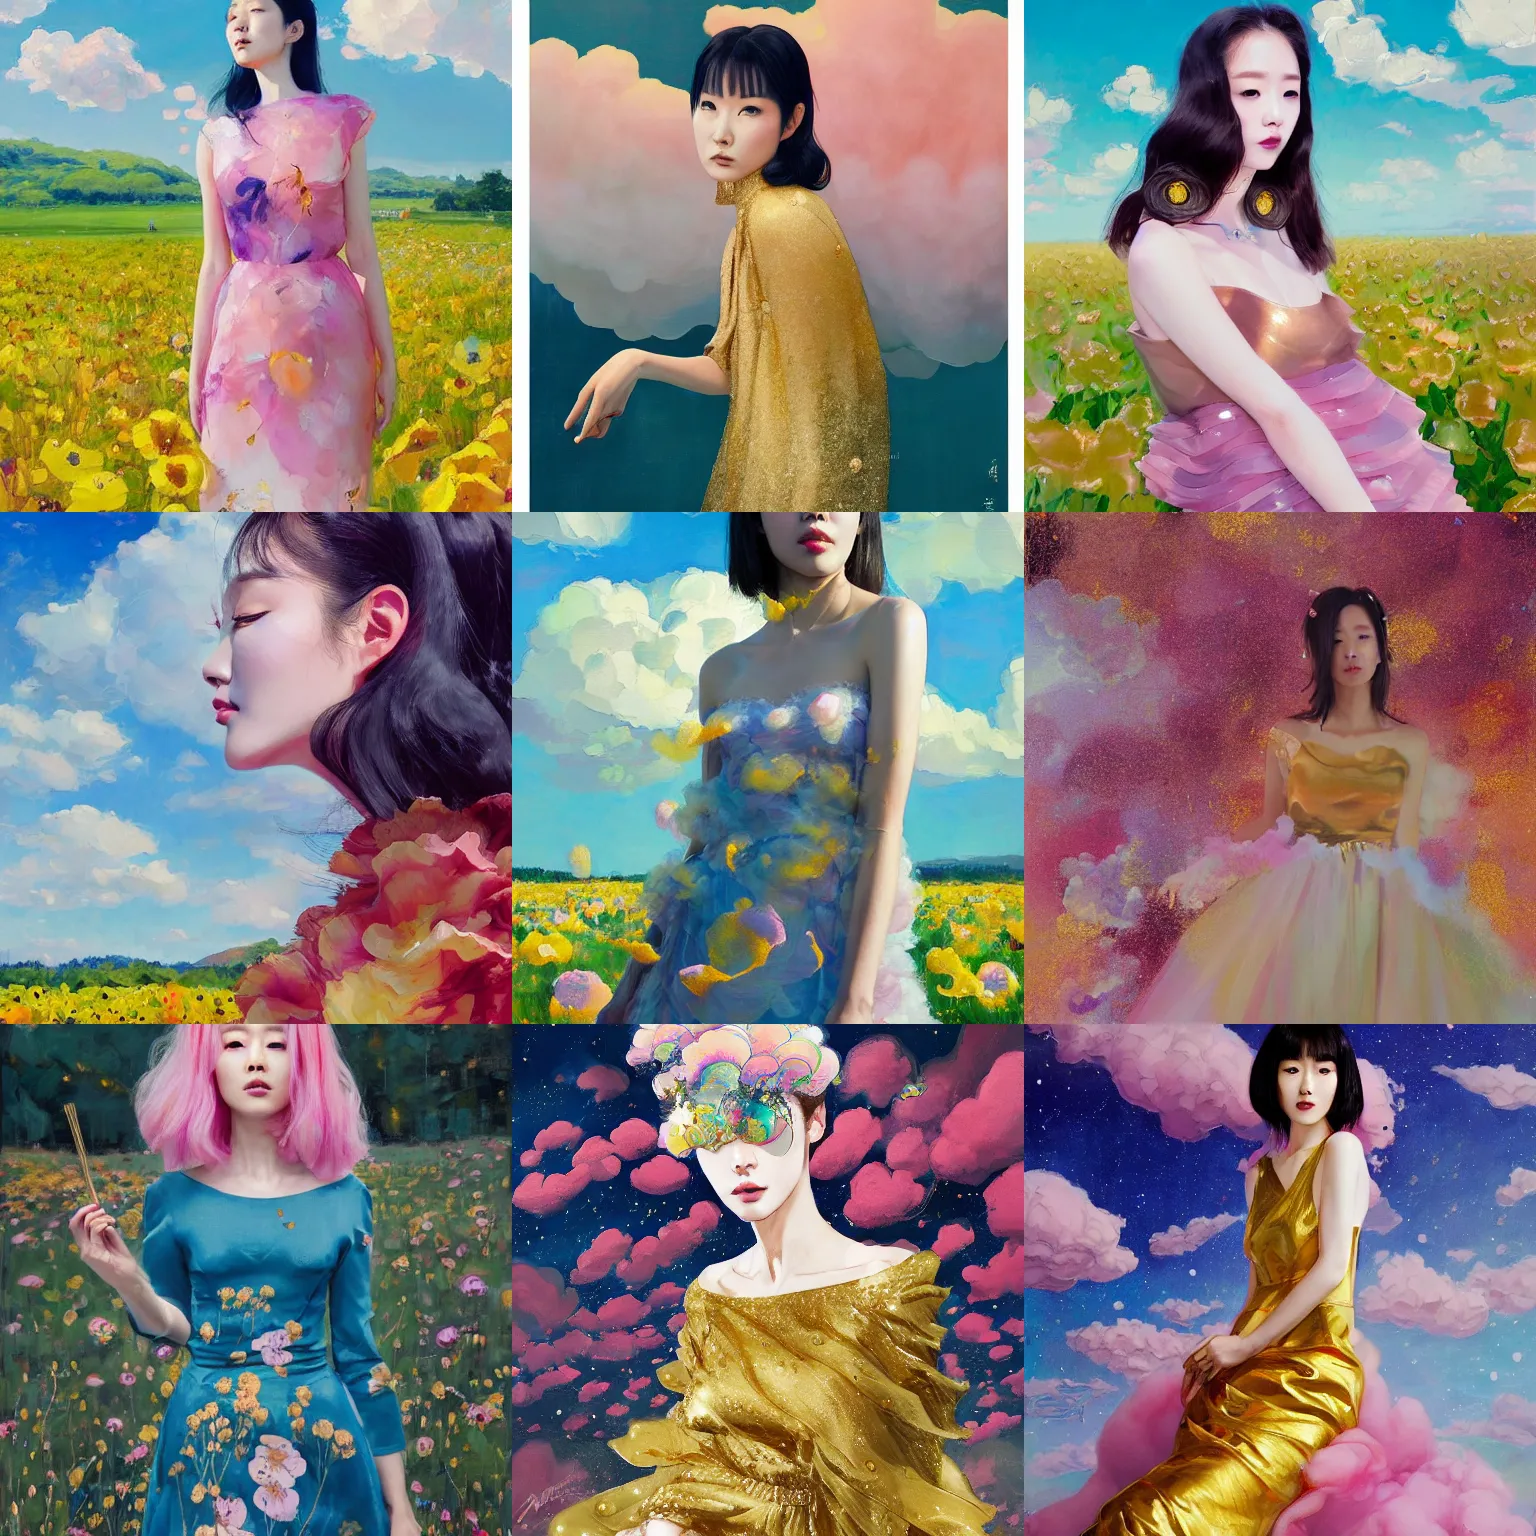 Prompt: lee jin - eun in elegant chic interstellar lush dress emerging from gold gold by martine johanna, michael garmash and katsuhiro otomo, rule of thirds, seductive look, beautiful, cotton candy clouds, puyallup berteronian, himalayan poppy flowers, gorgeous, face anatomy